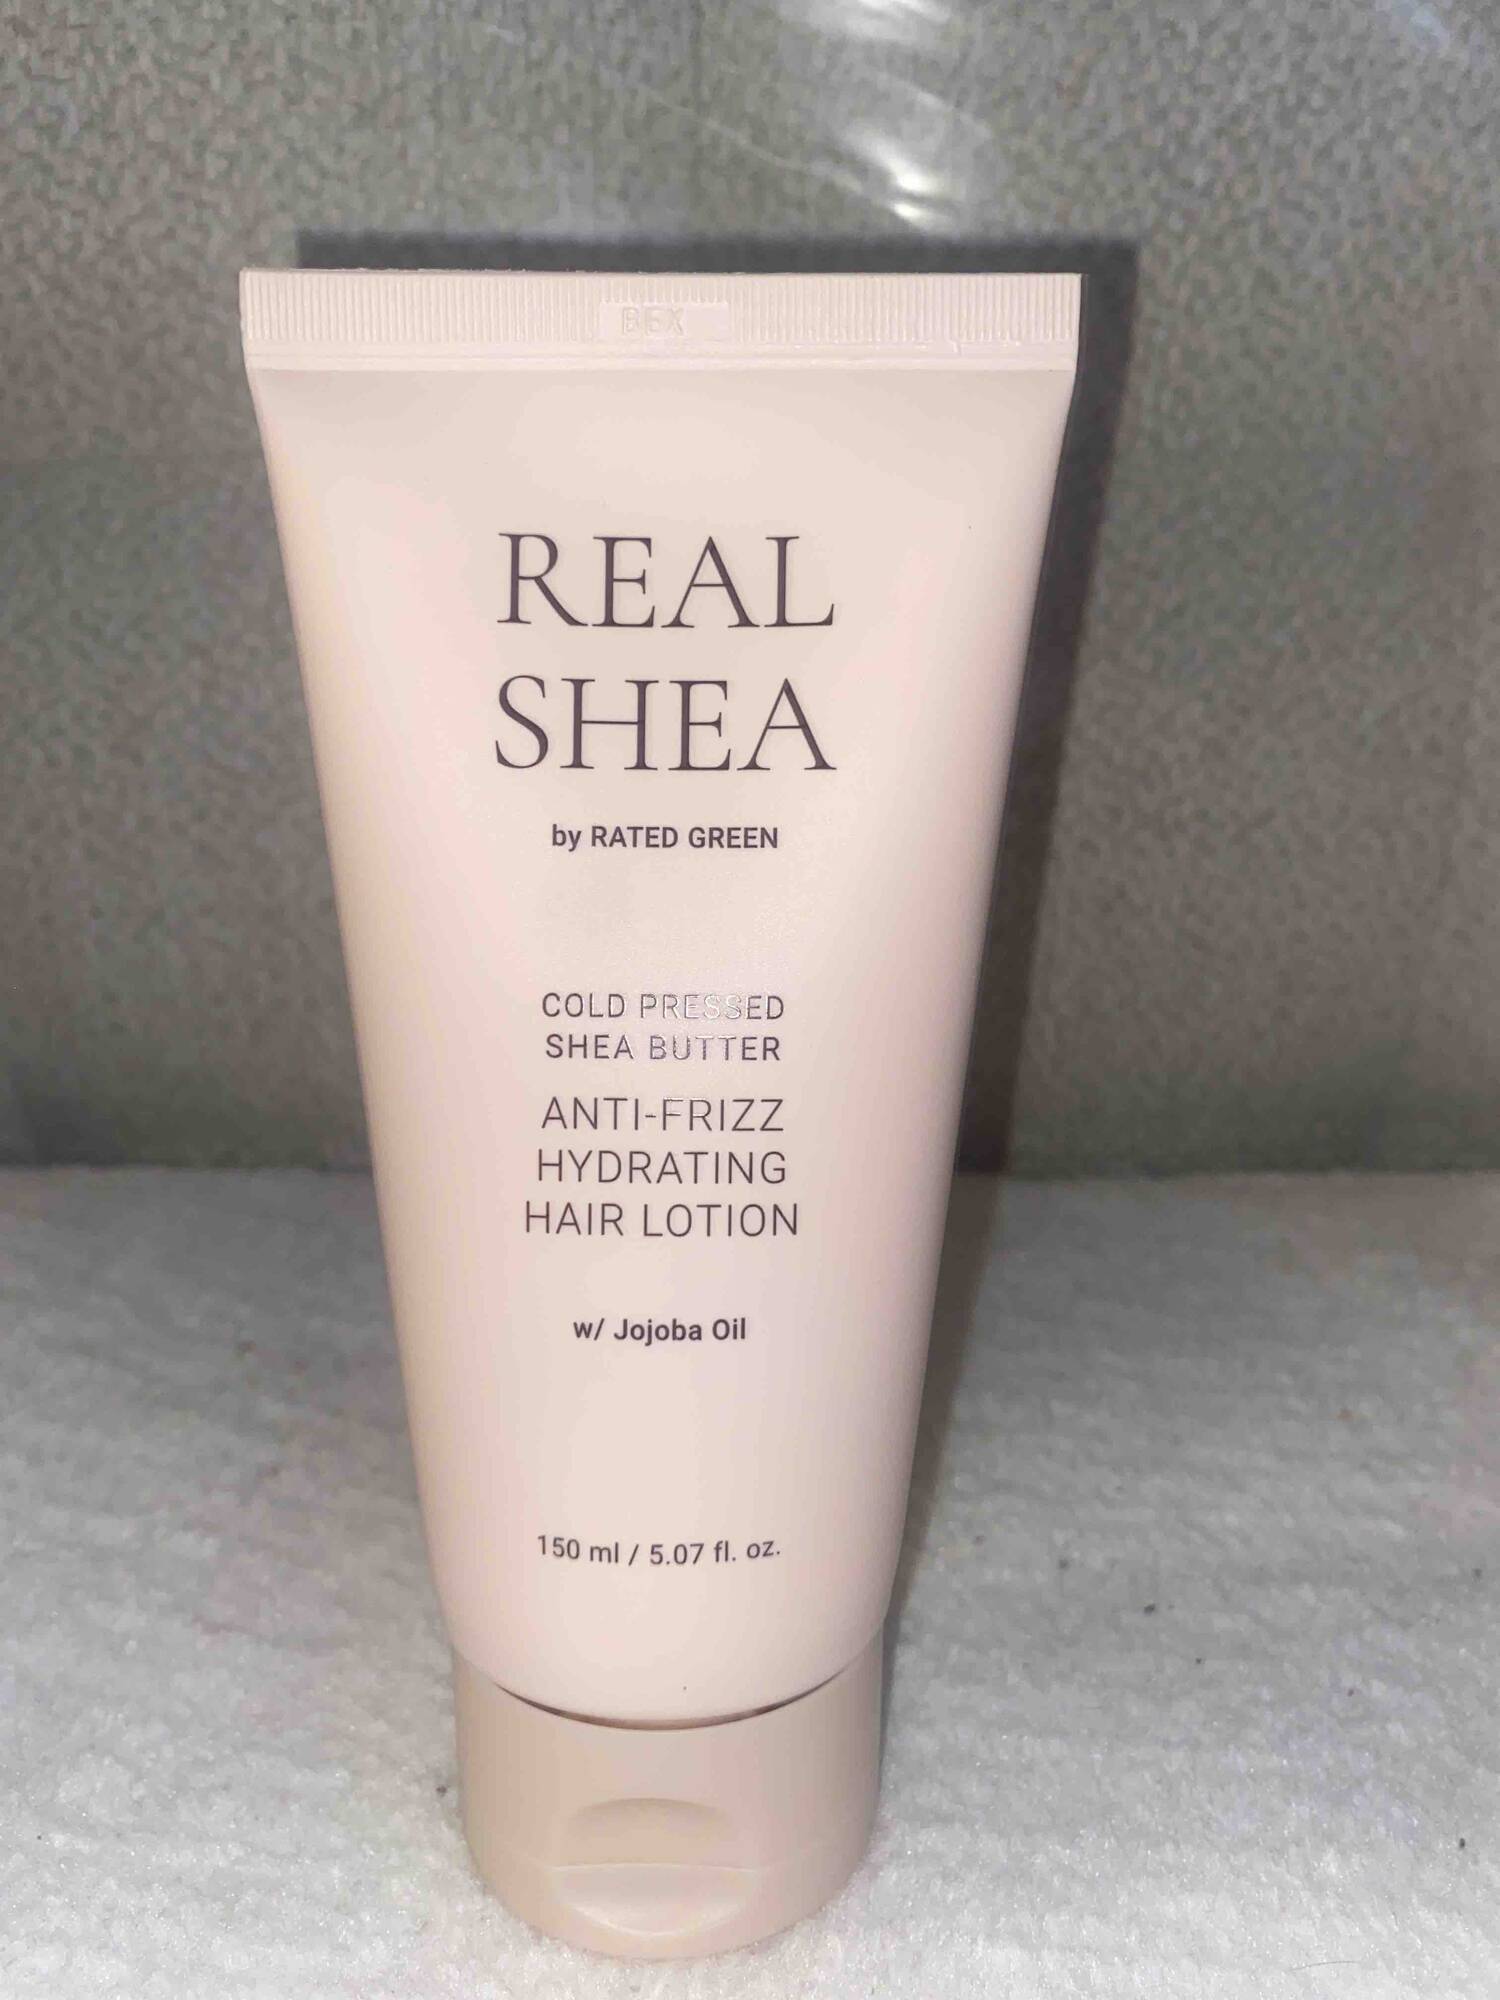 RATED GREEN - Real shea - Hydrating hair lotion